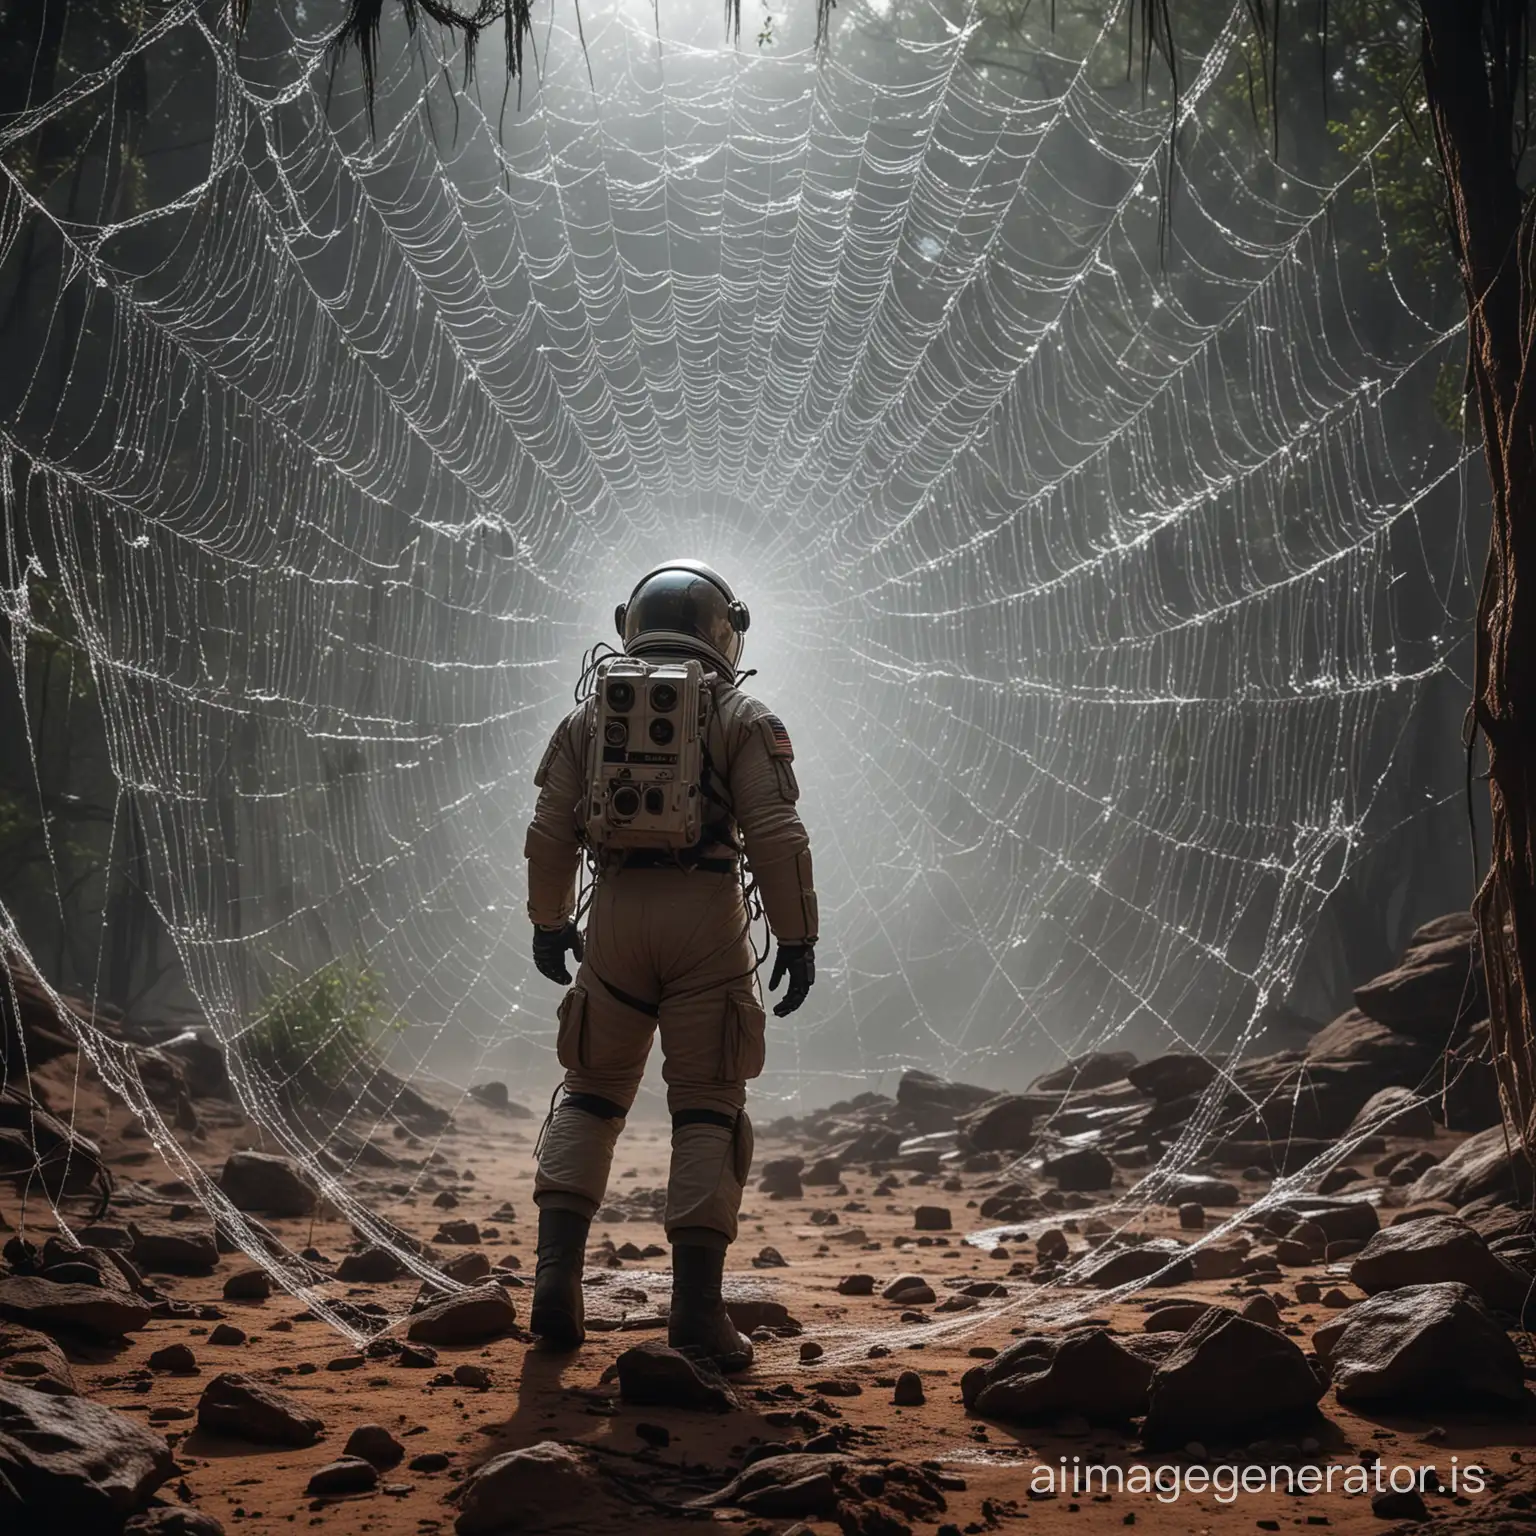 Astronaut-Caught-in-Enormous-Spider-Web-on-Mysterious-Alien-Planet